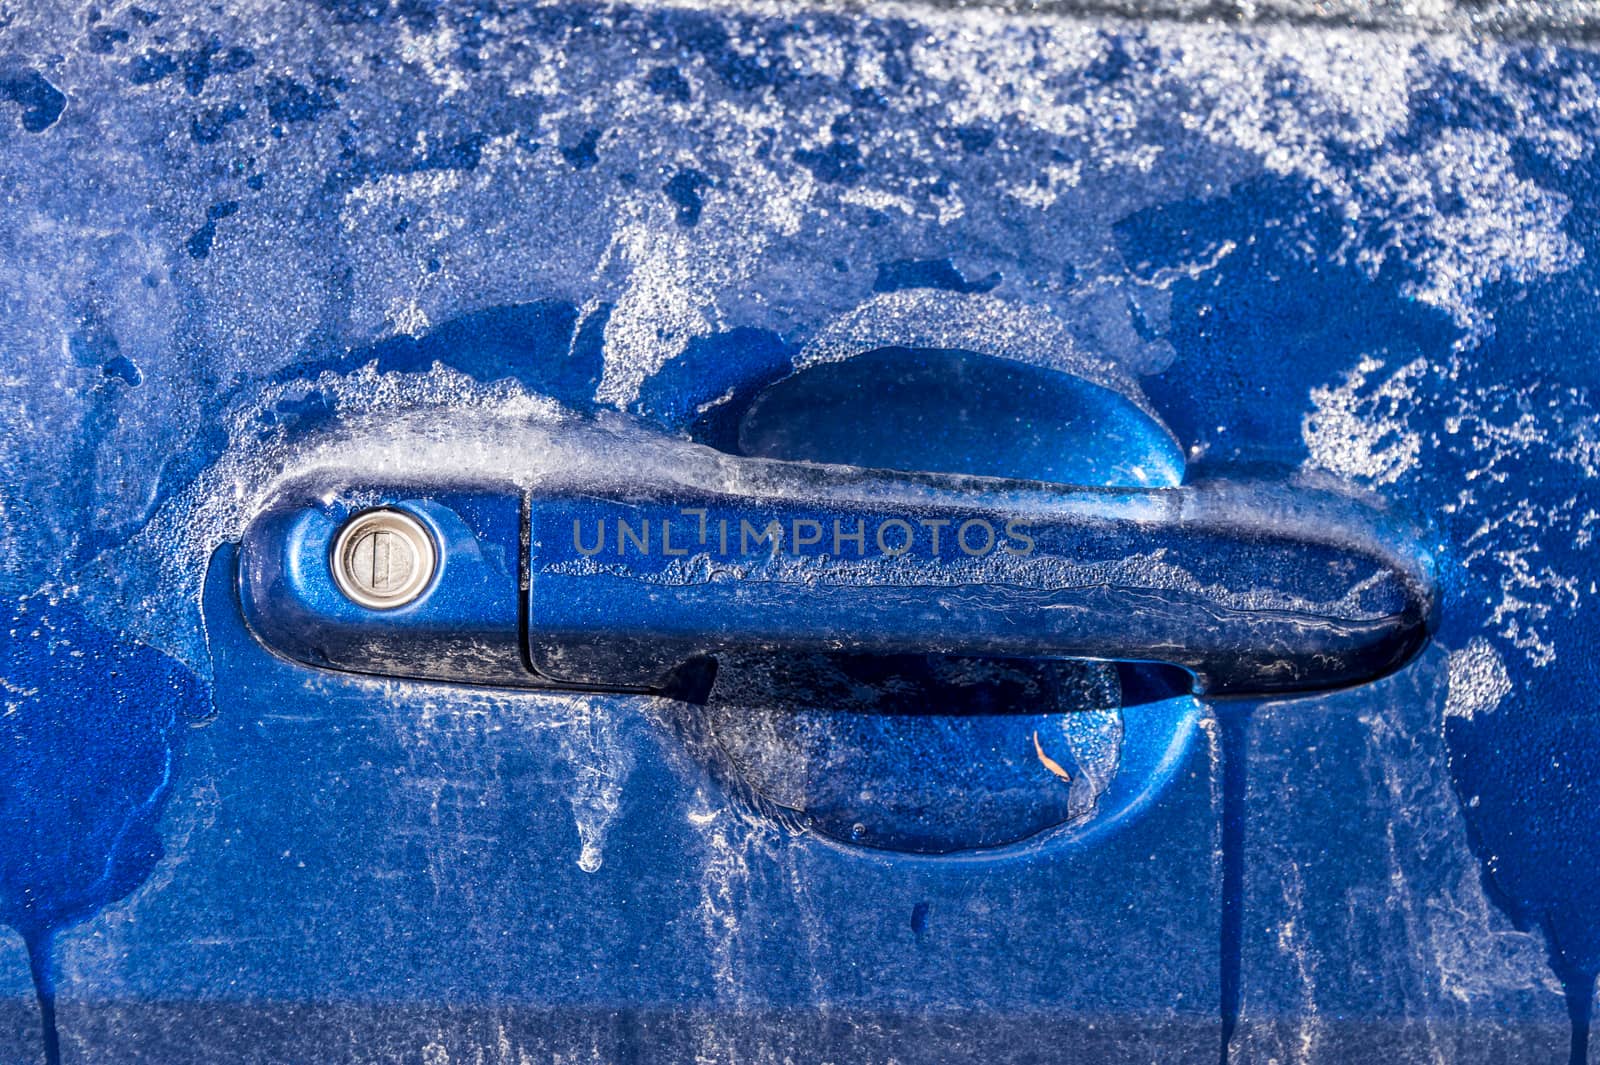 Thick layer of ice covering car after freezing rain in Montreal, Canada - Close up of car handle.